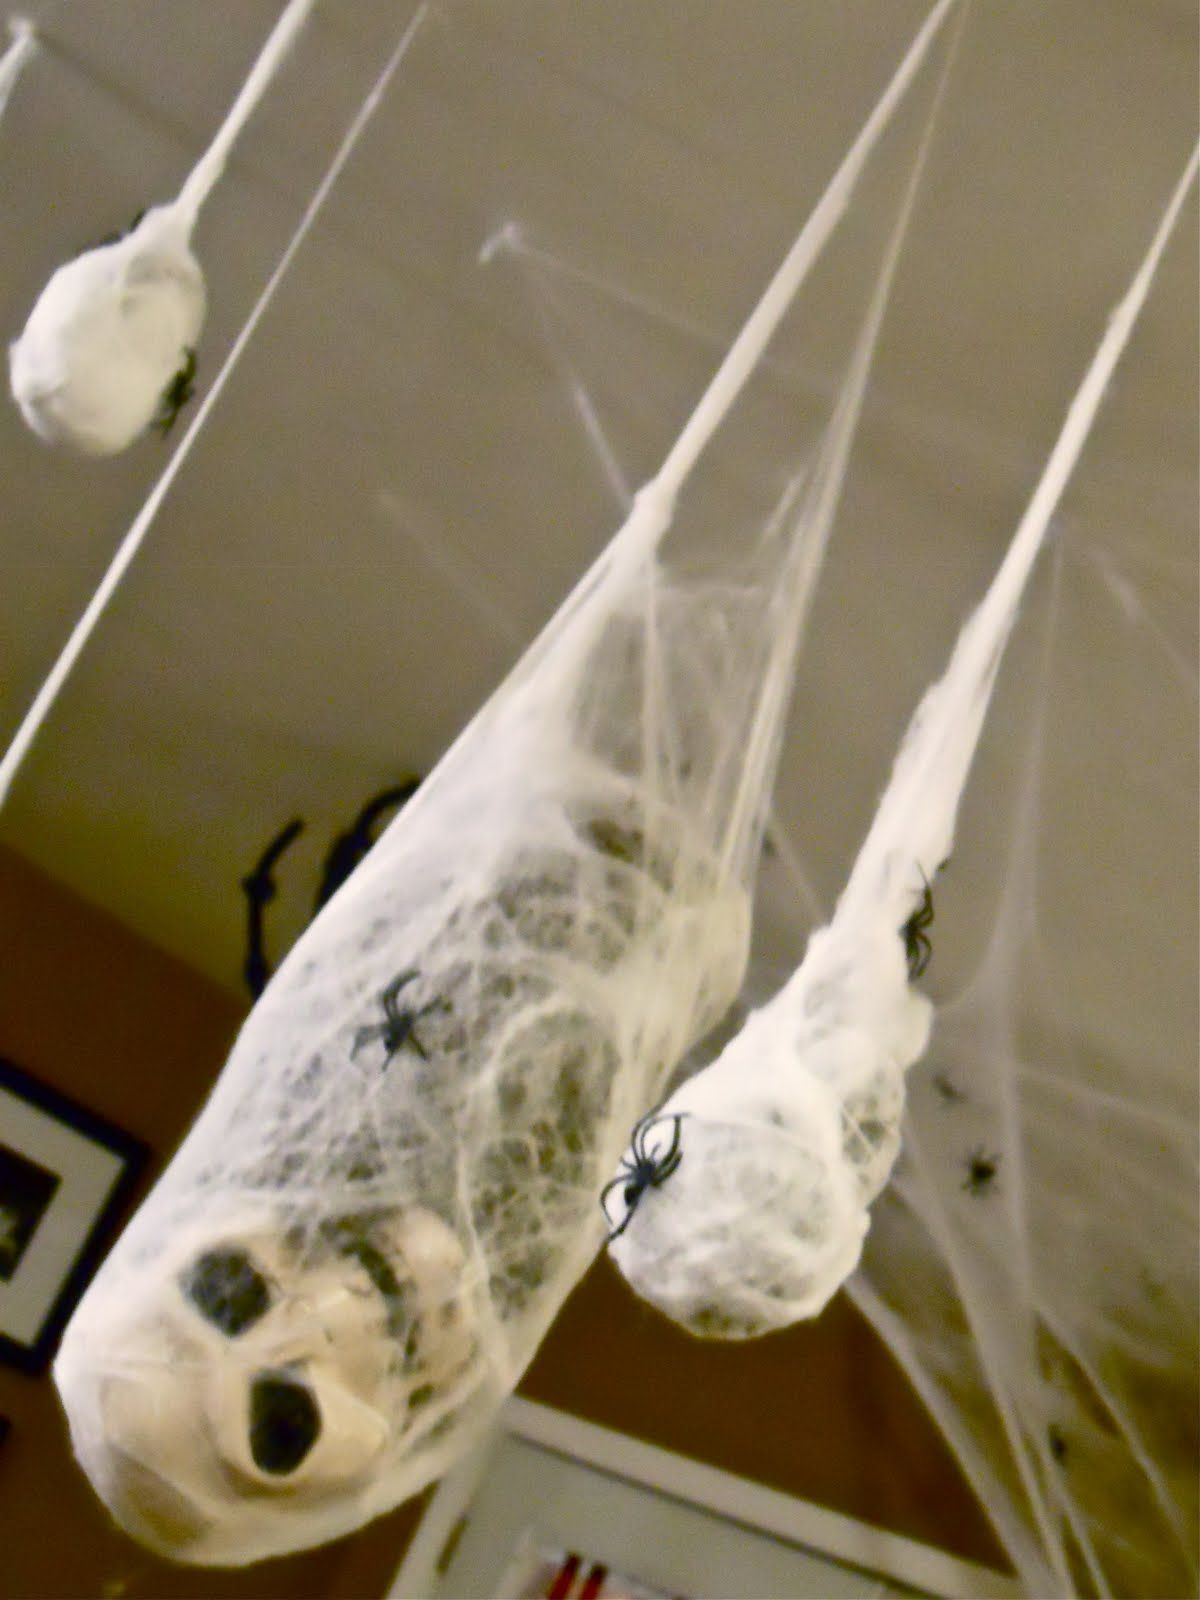 DIY Halloween Decorations Scary
 20 Super Scary Halloween Decorations